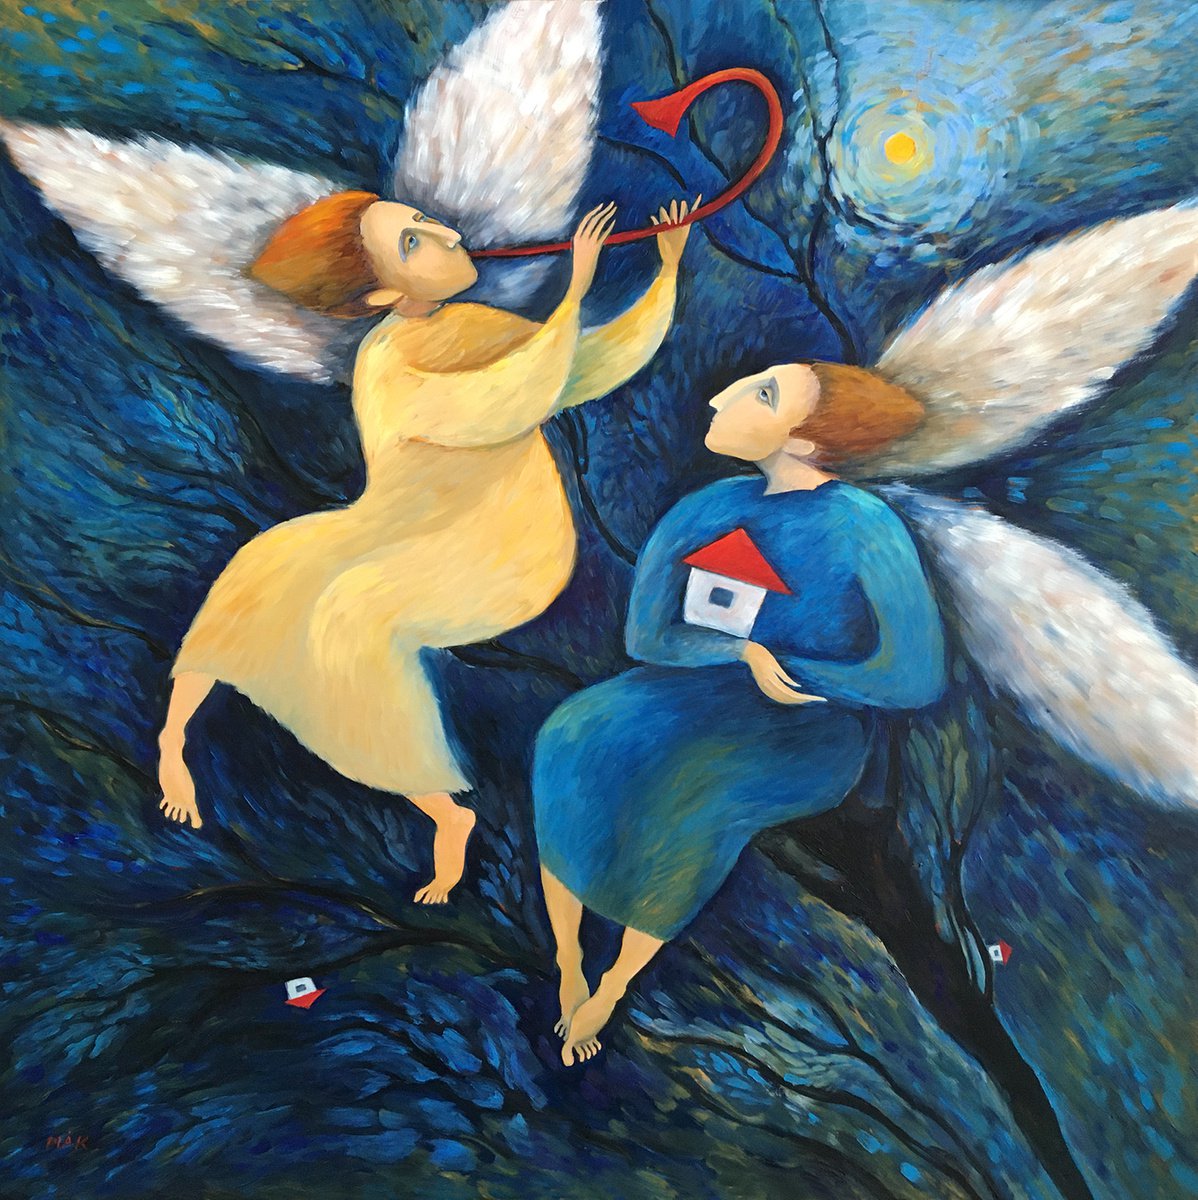 ANGELS OF PEACE - big oil painting with angels protecting people